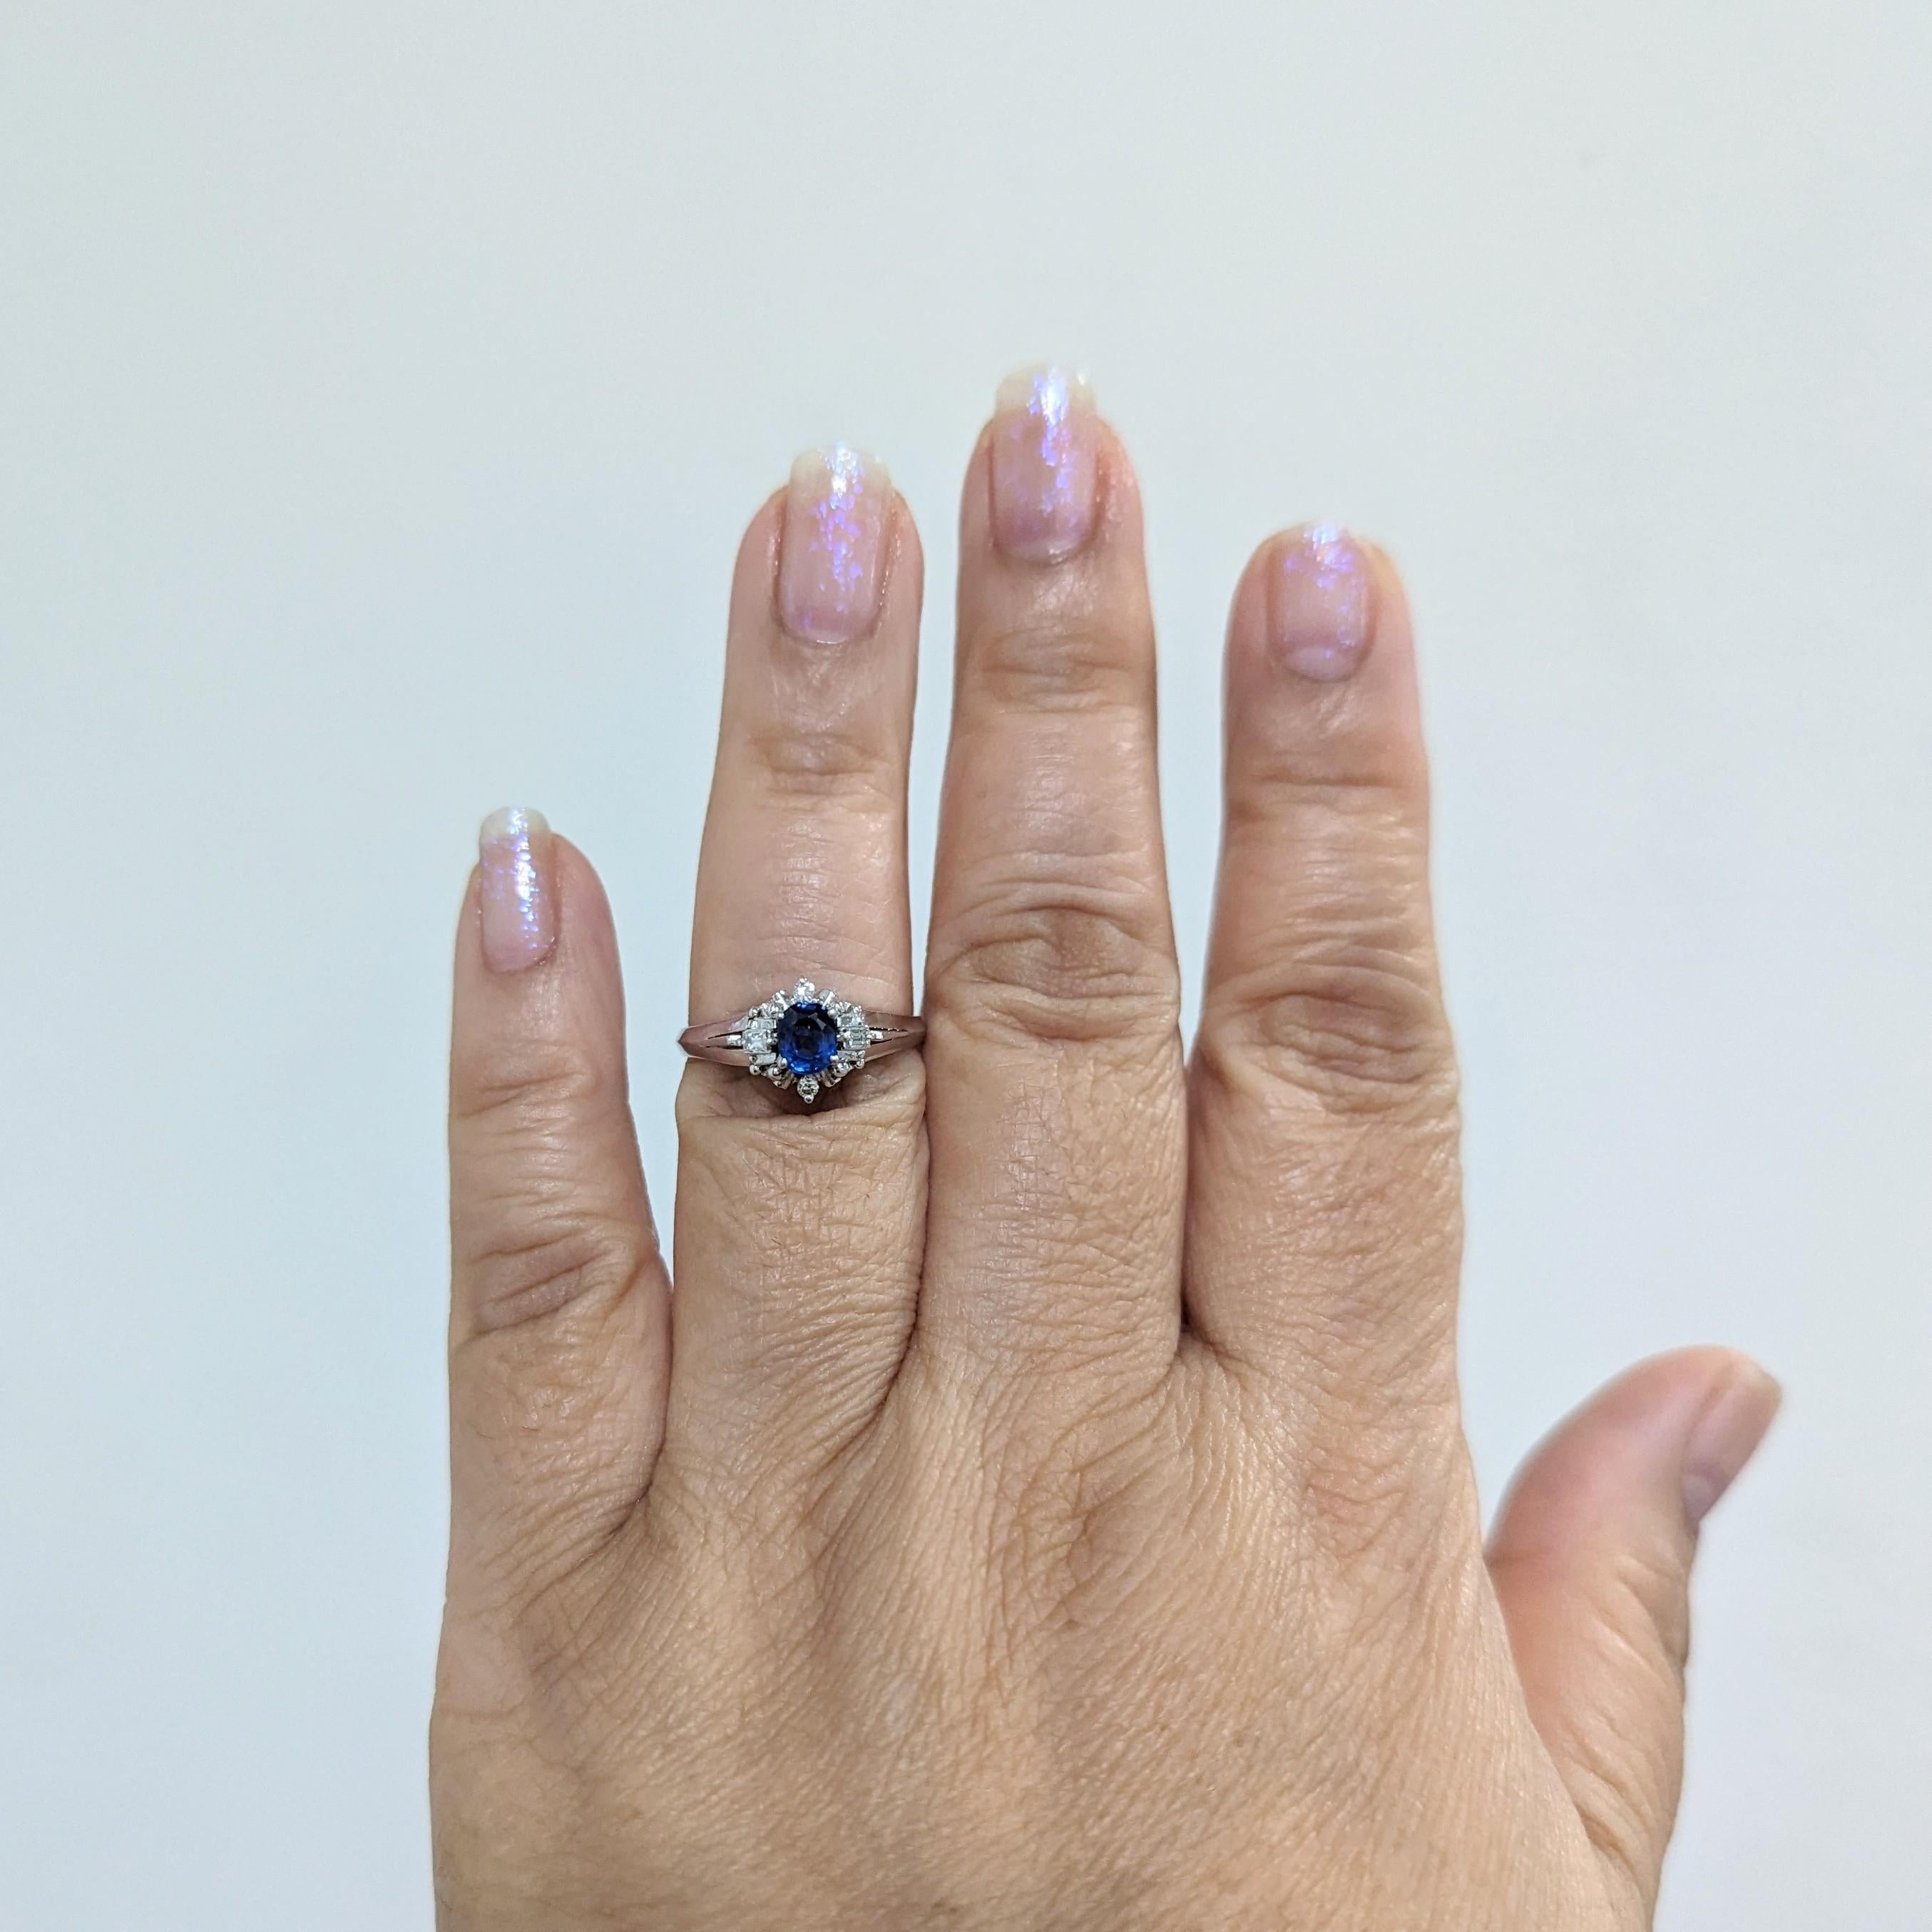 Beautiful 0.52 ct. blue sapphire oval with 0.11 ct. white diamond rounds and baguettes.  Handmade in platinum.  Ring size 8.